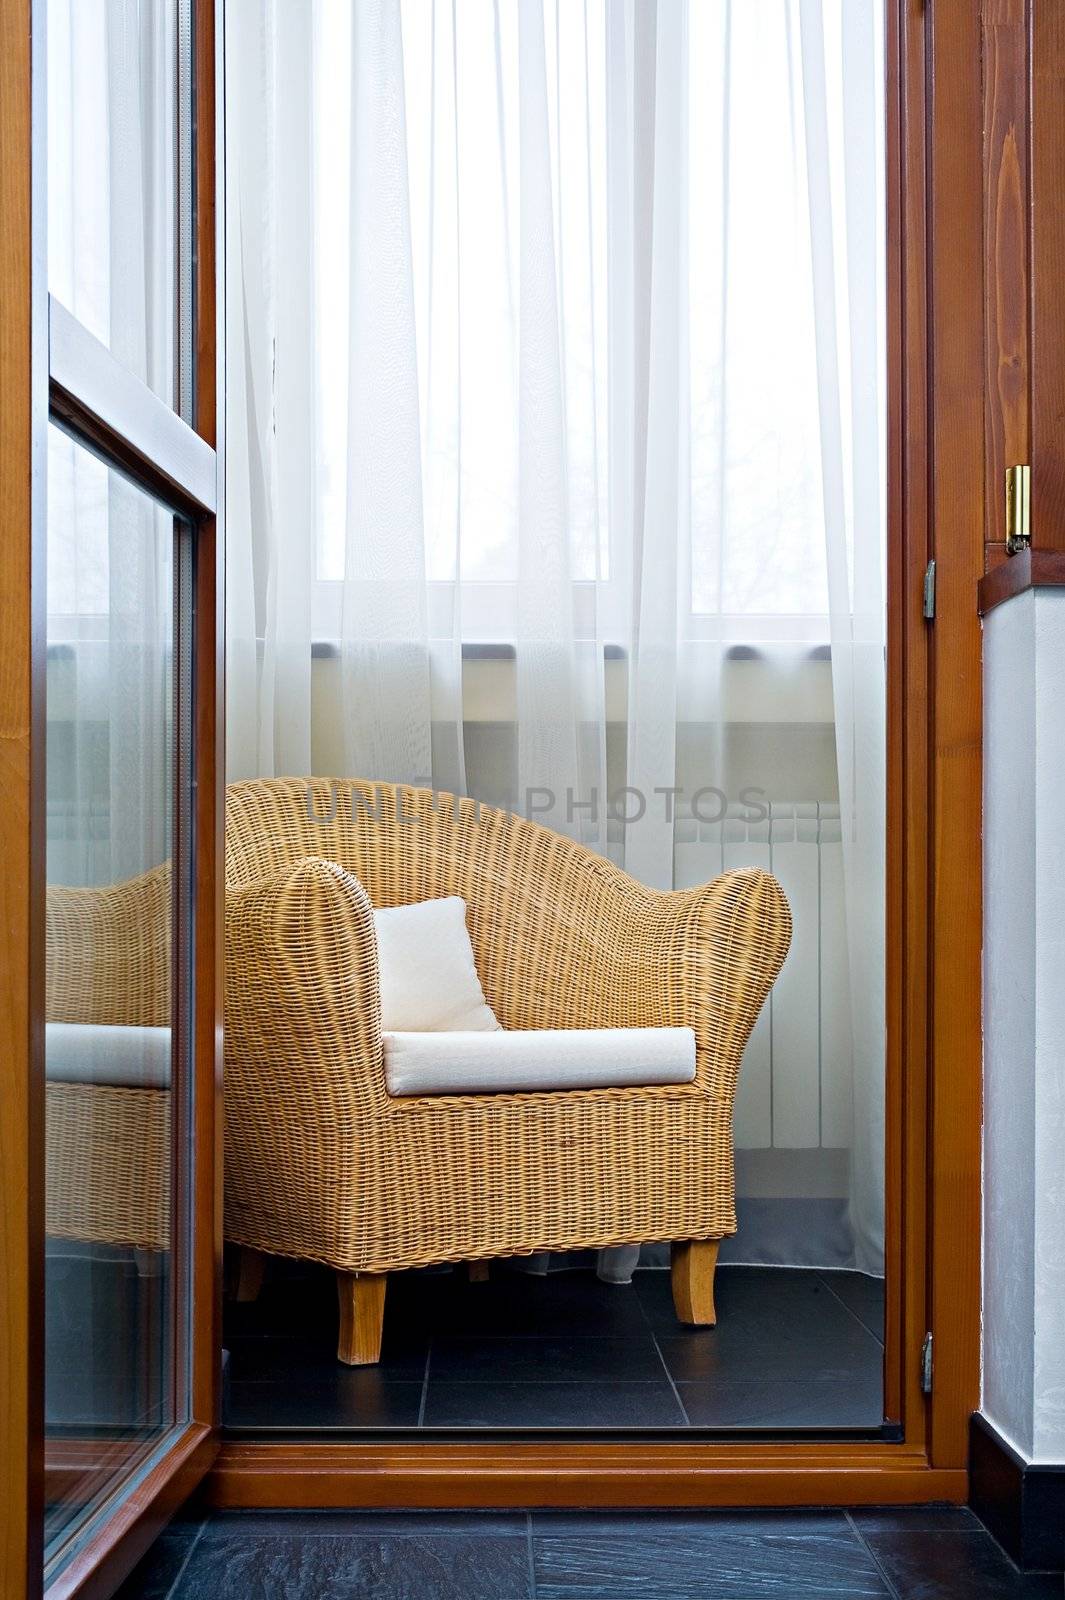 Open door on a balcony on which there is a wicker chair
